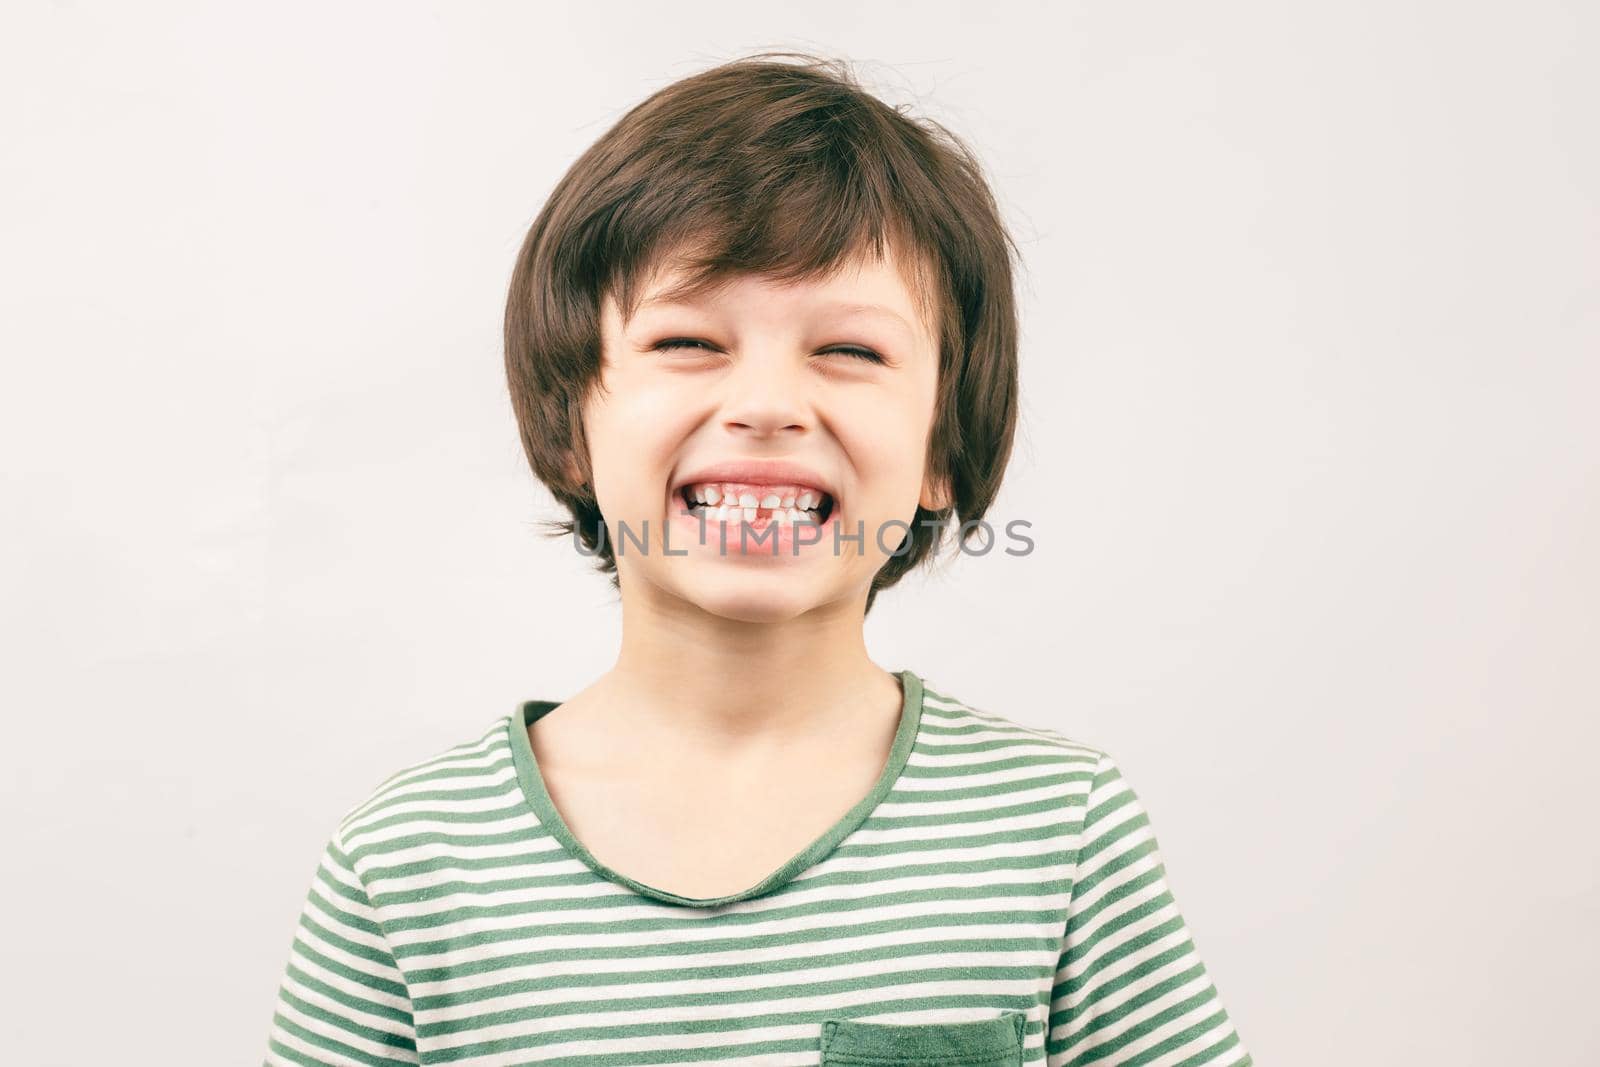 White 6 year old boy shows his smile without one tooth. Kids dental health concept